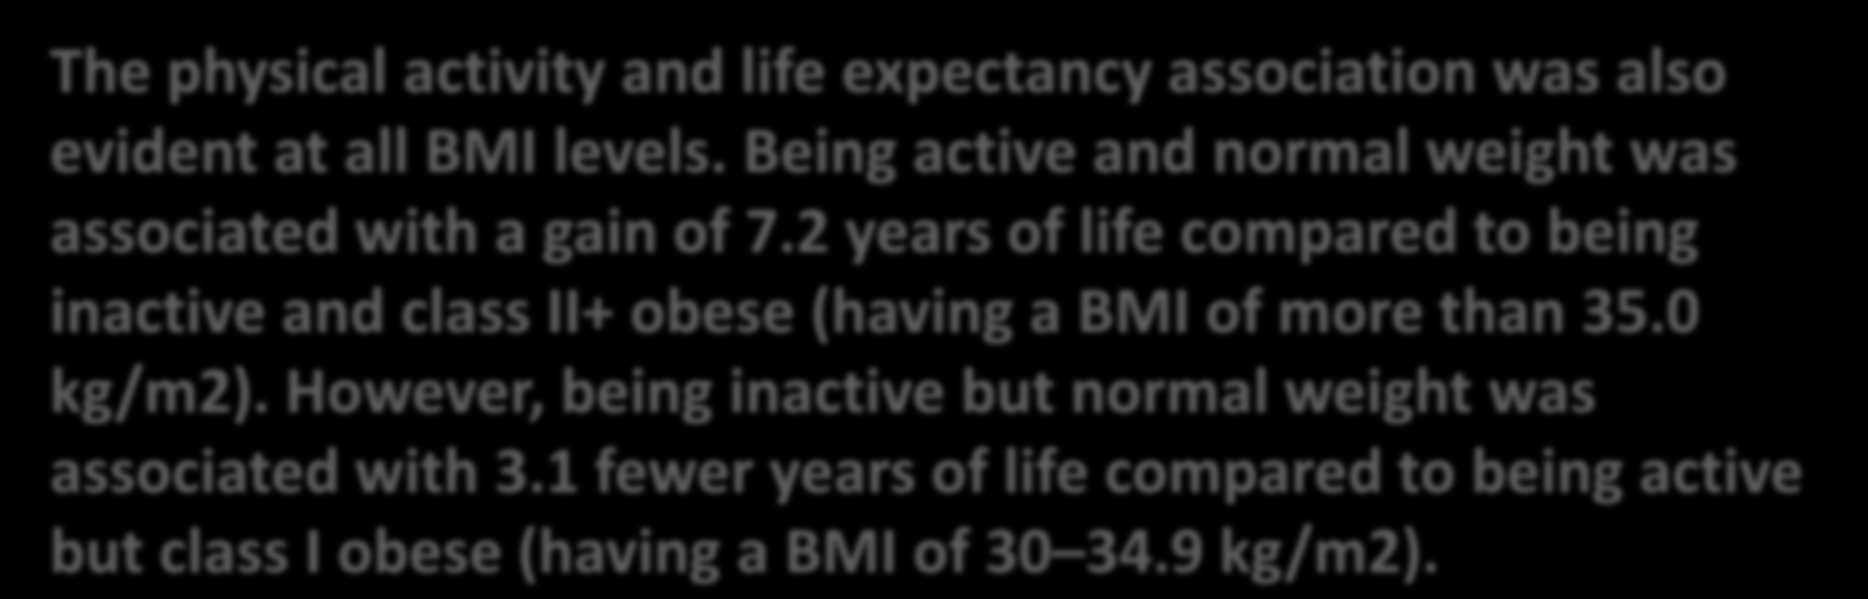 The physical activity and life expectancy association was also evident at all BMI levels. Being active and normal weight was associated with a gain of 7.